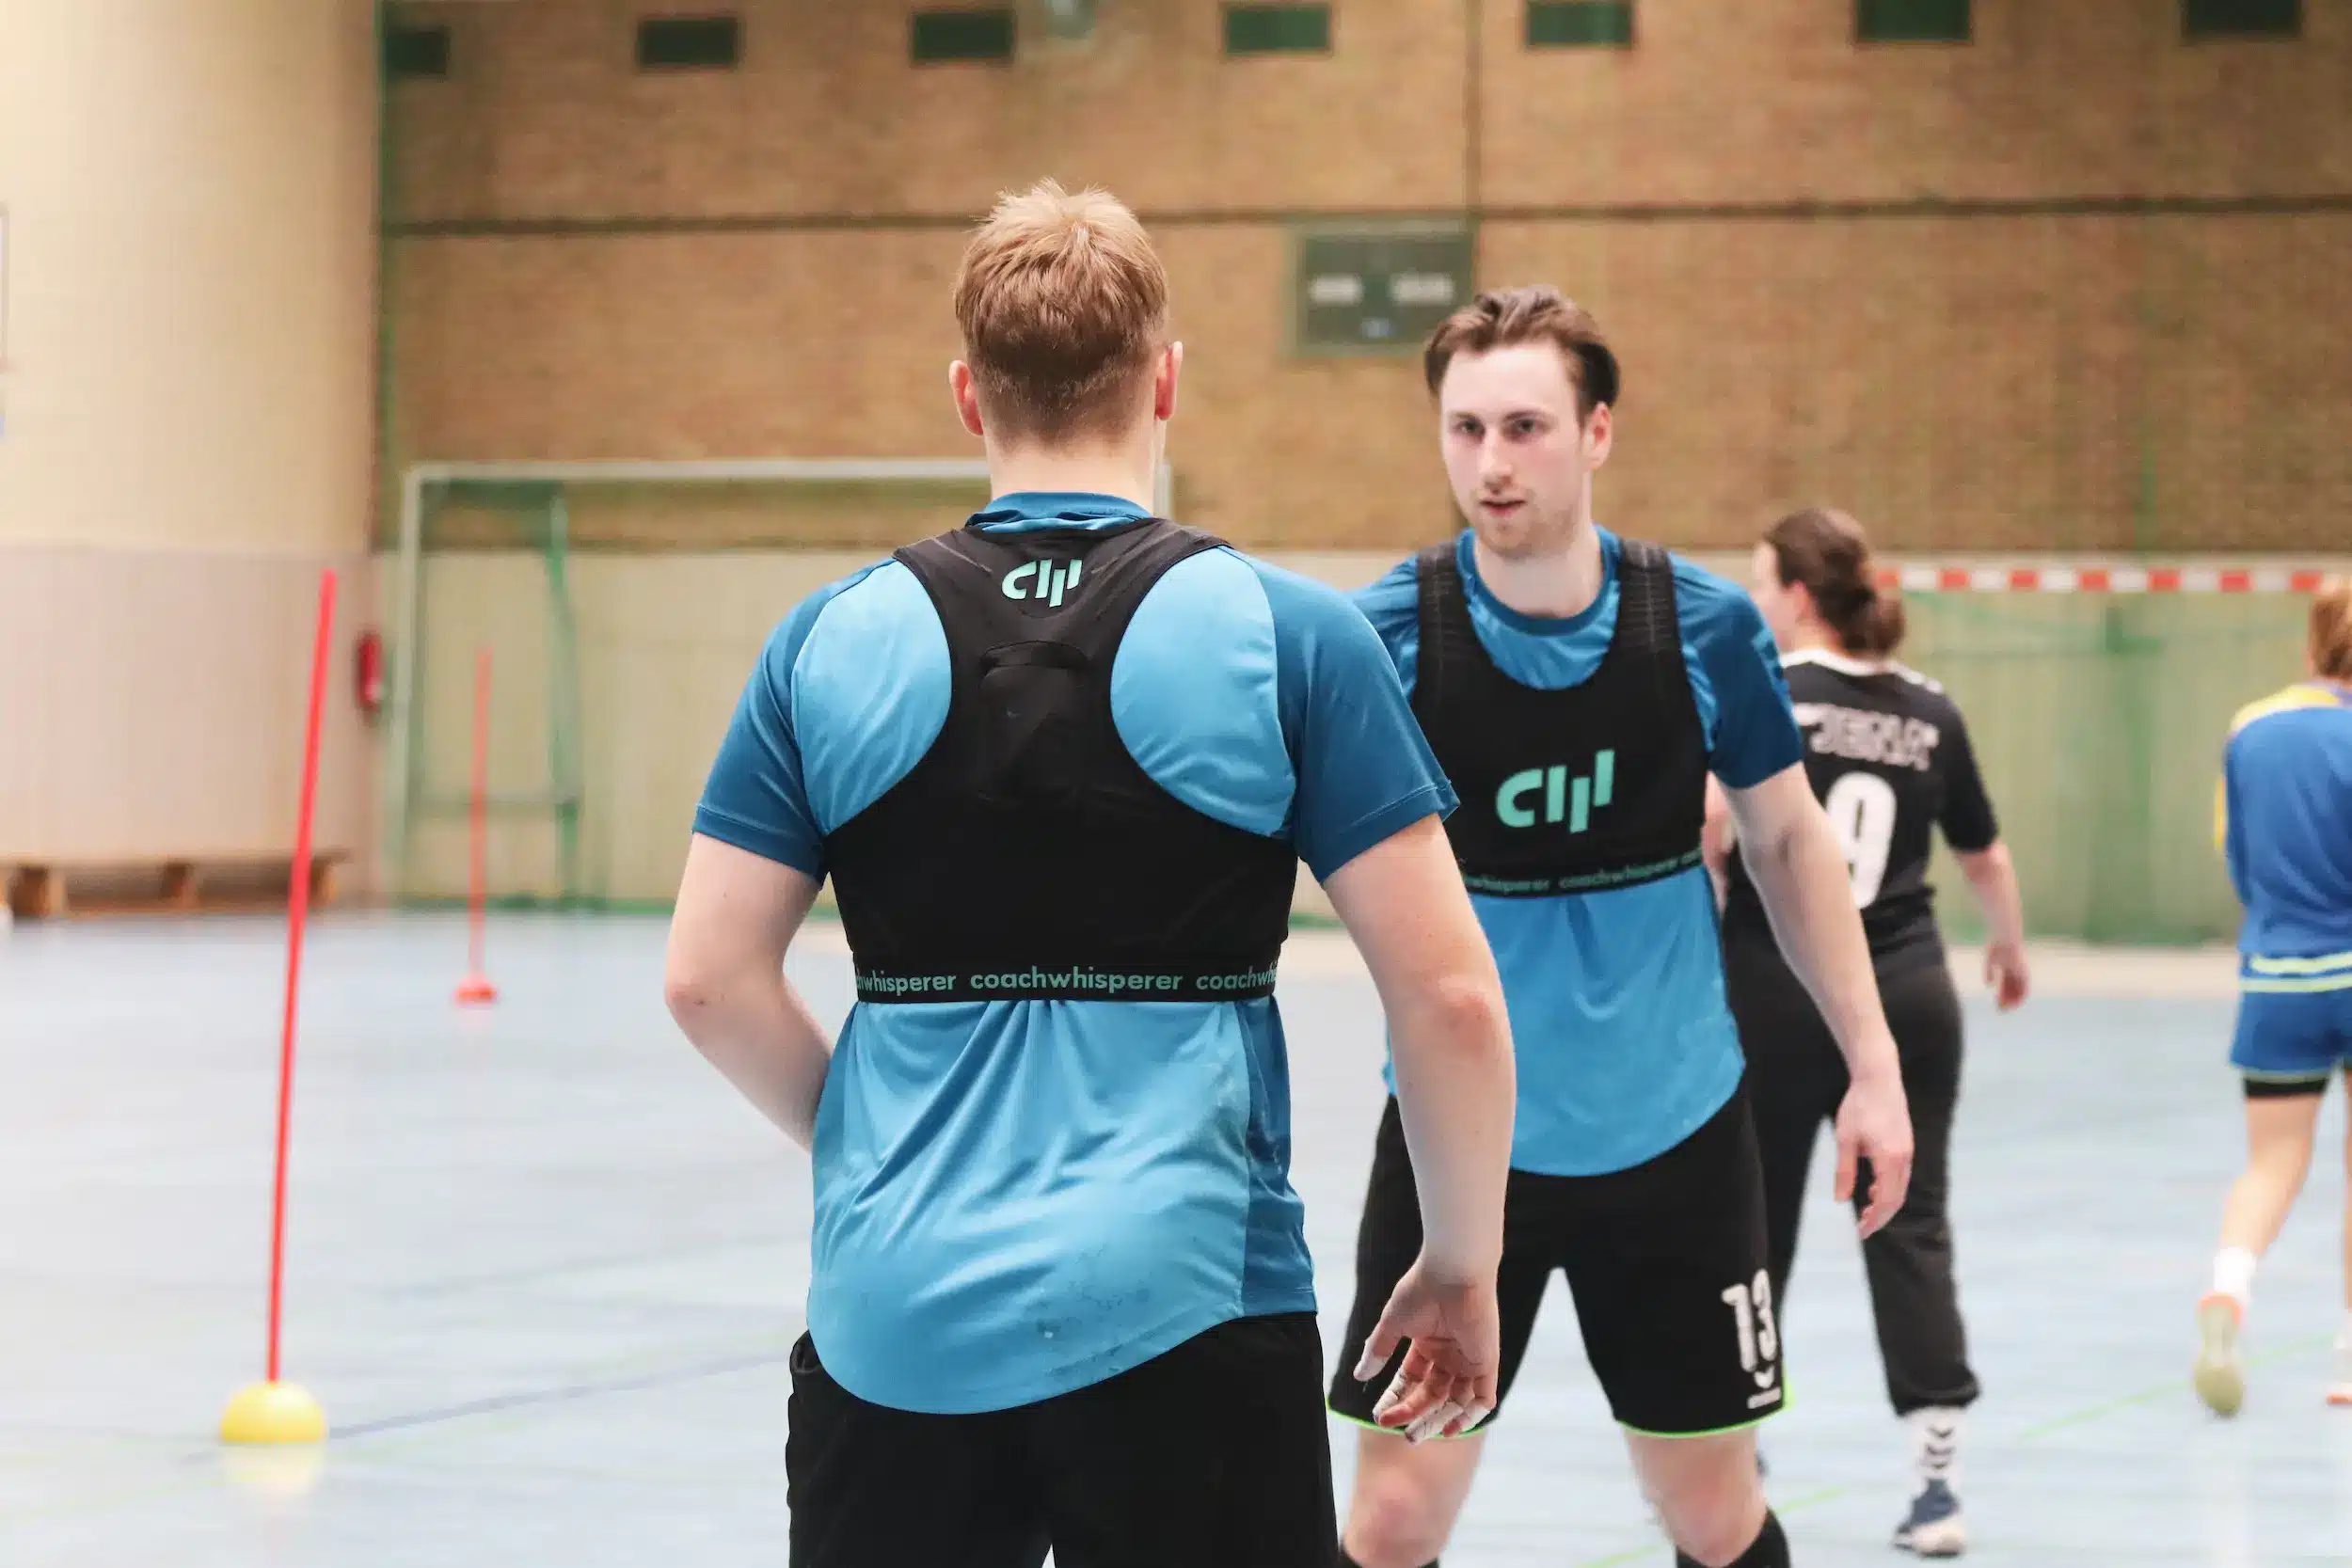 Handball players wearing the Soundstar while training with the Coachwhisperer